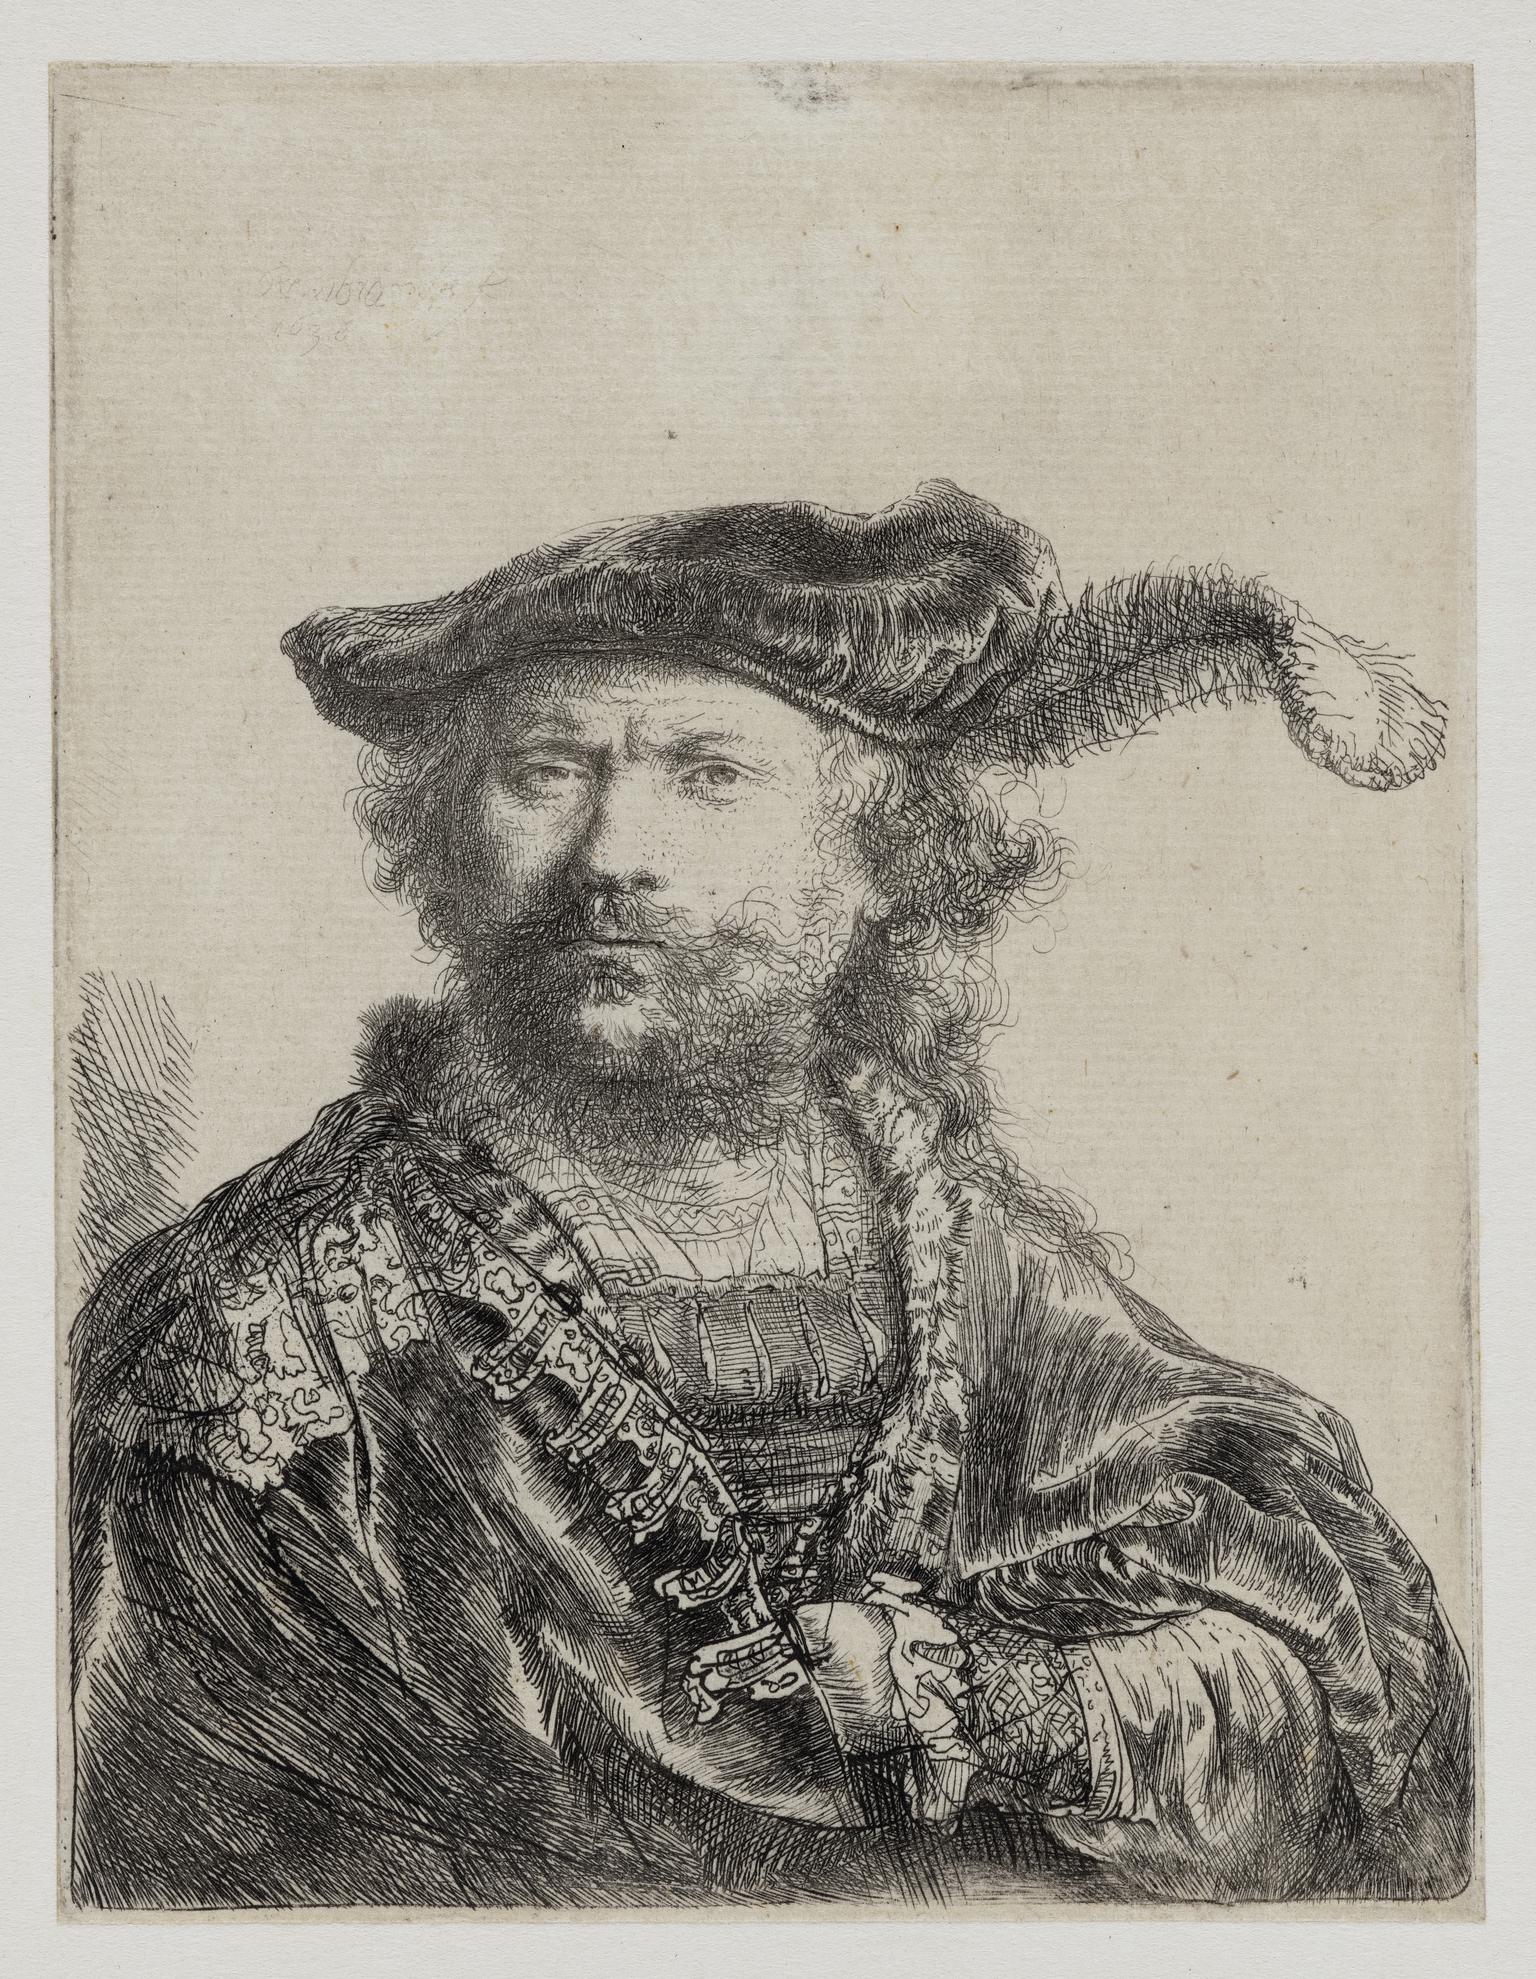 Rembrandt in velvet cap and plume, with an embroidered dress